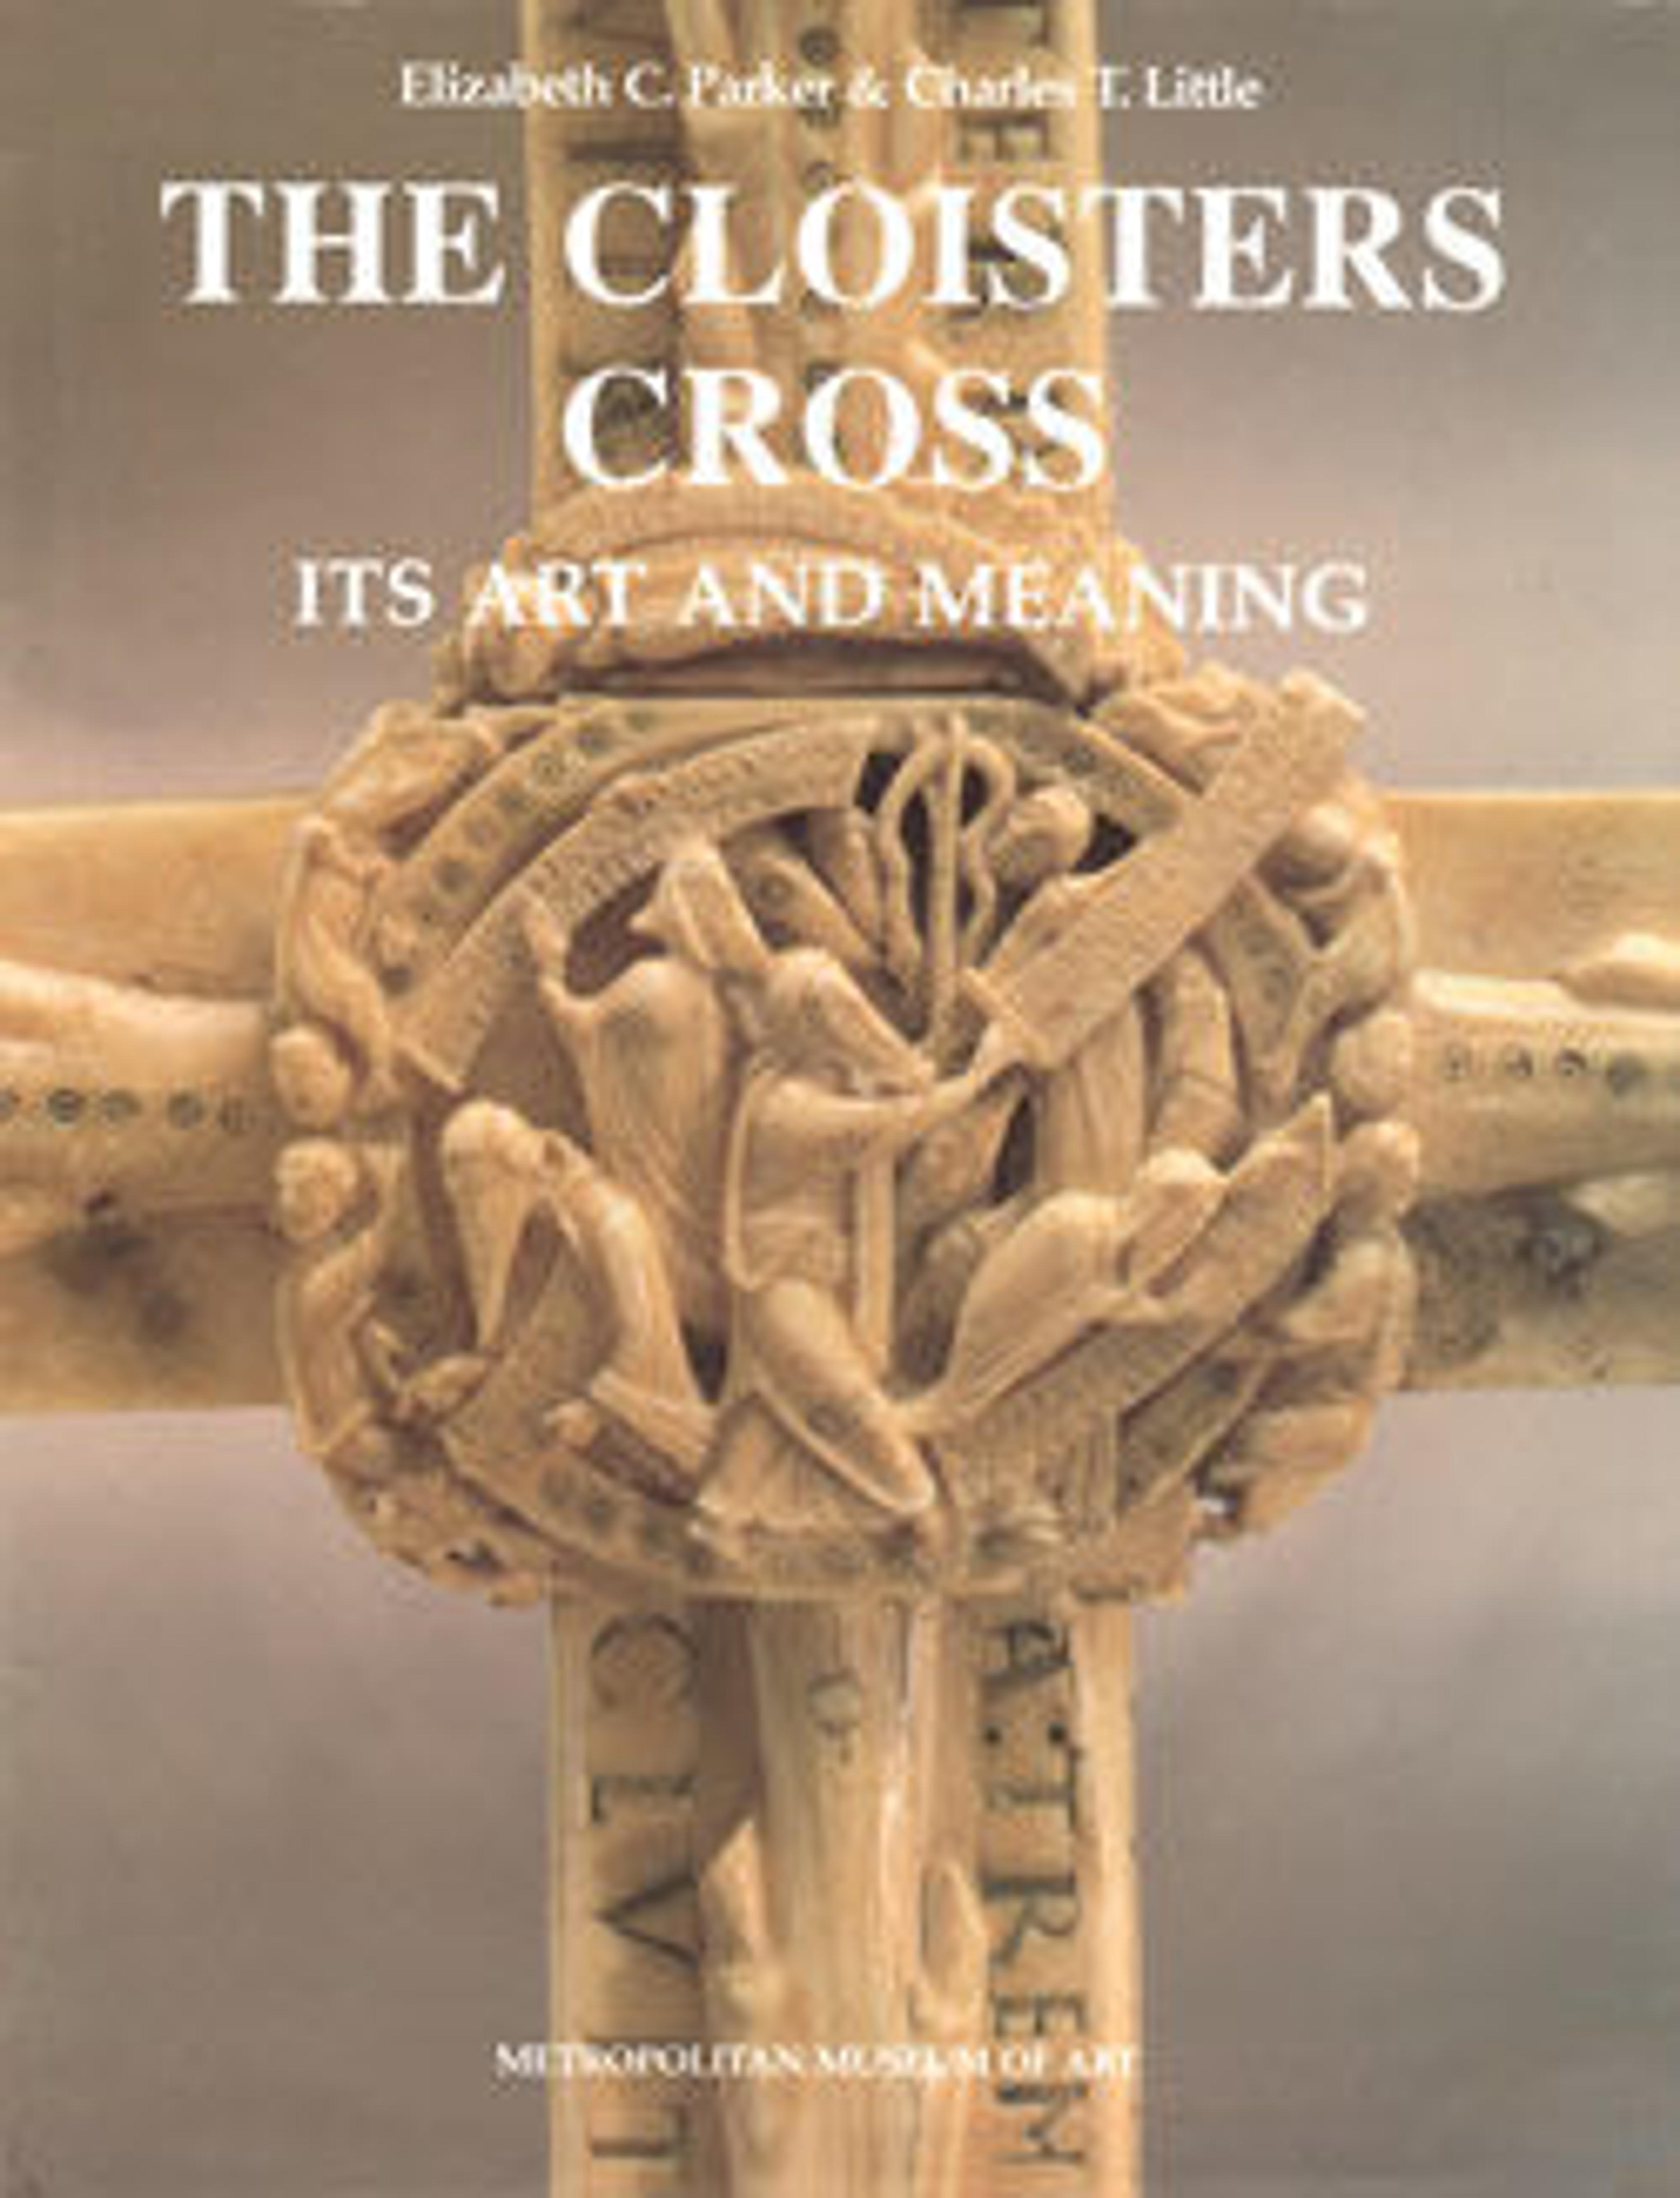 The Cloisters Cross: Its Art and Meaning